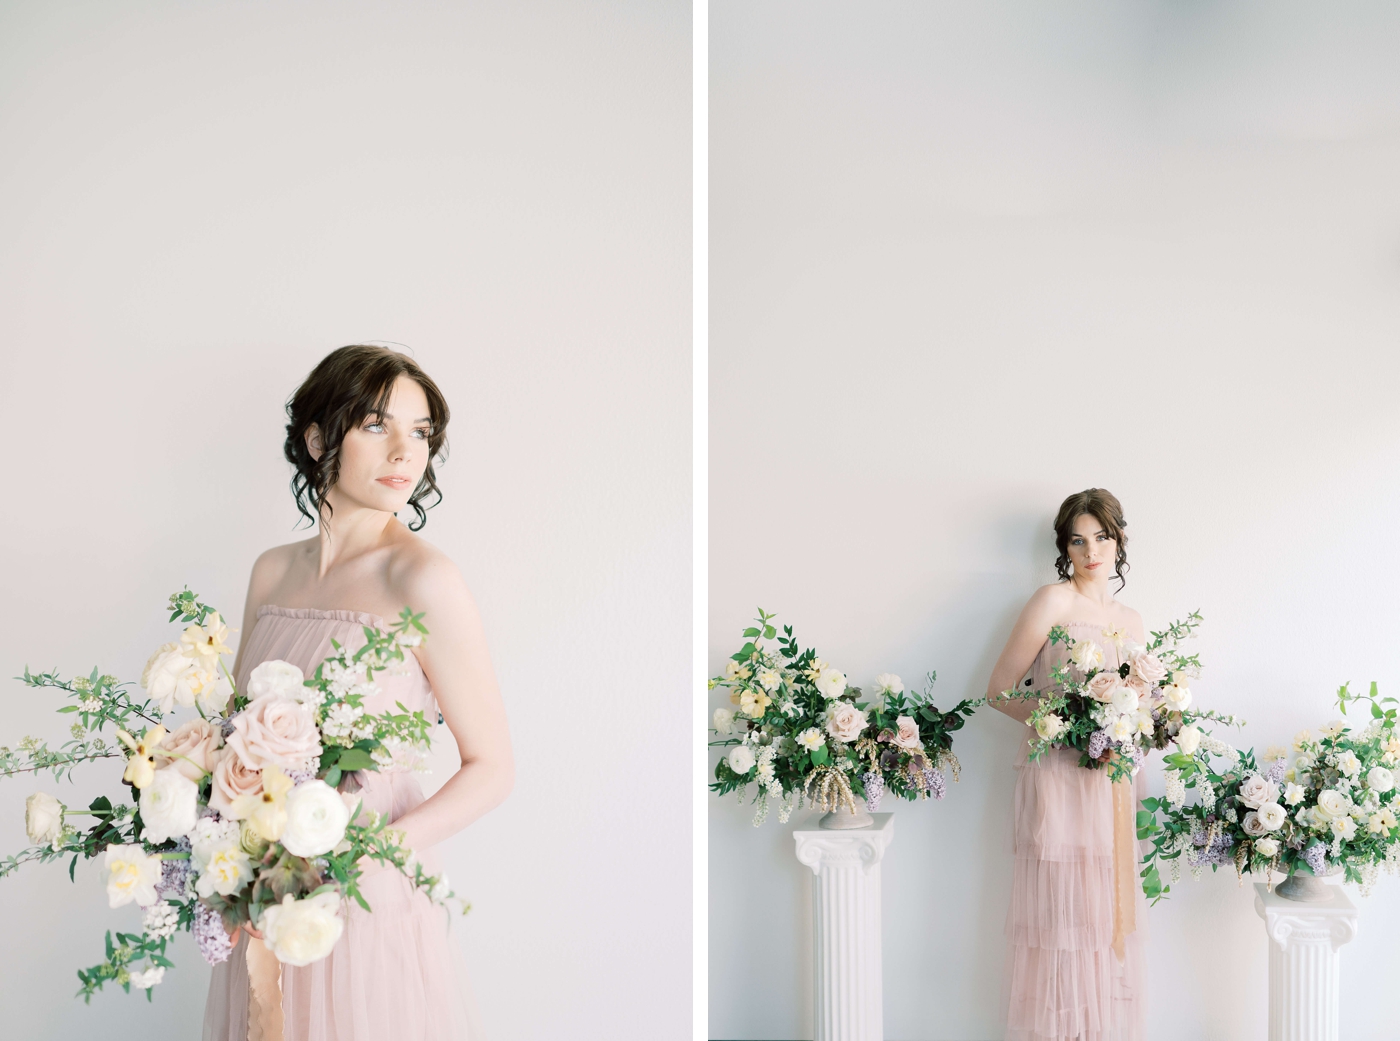 Wild Indigo 1:1 floral workshop with Aesthetic Events & Florals in Harrisburg, PA